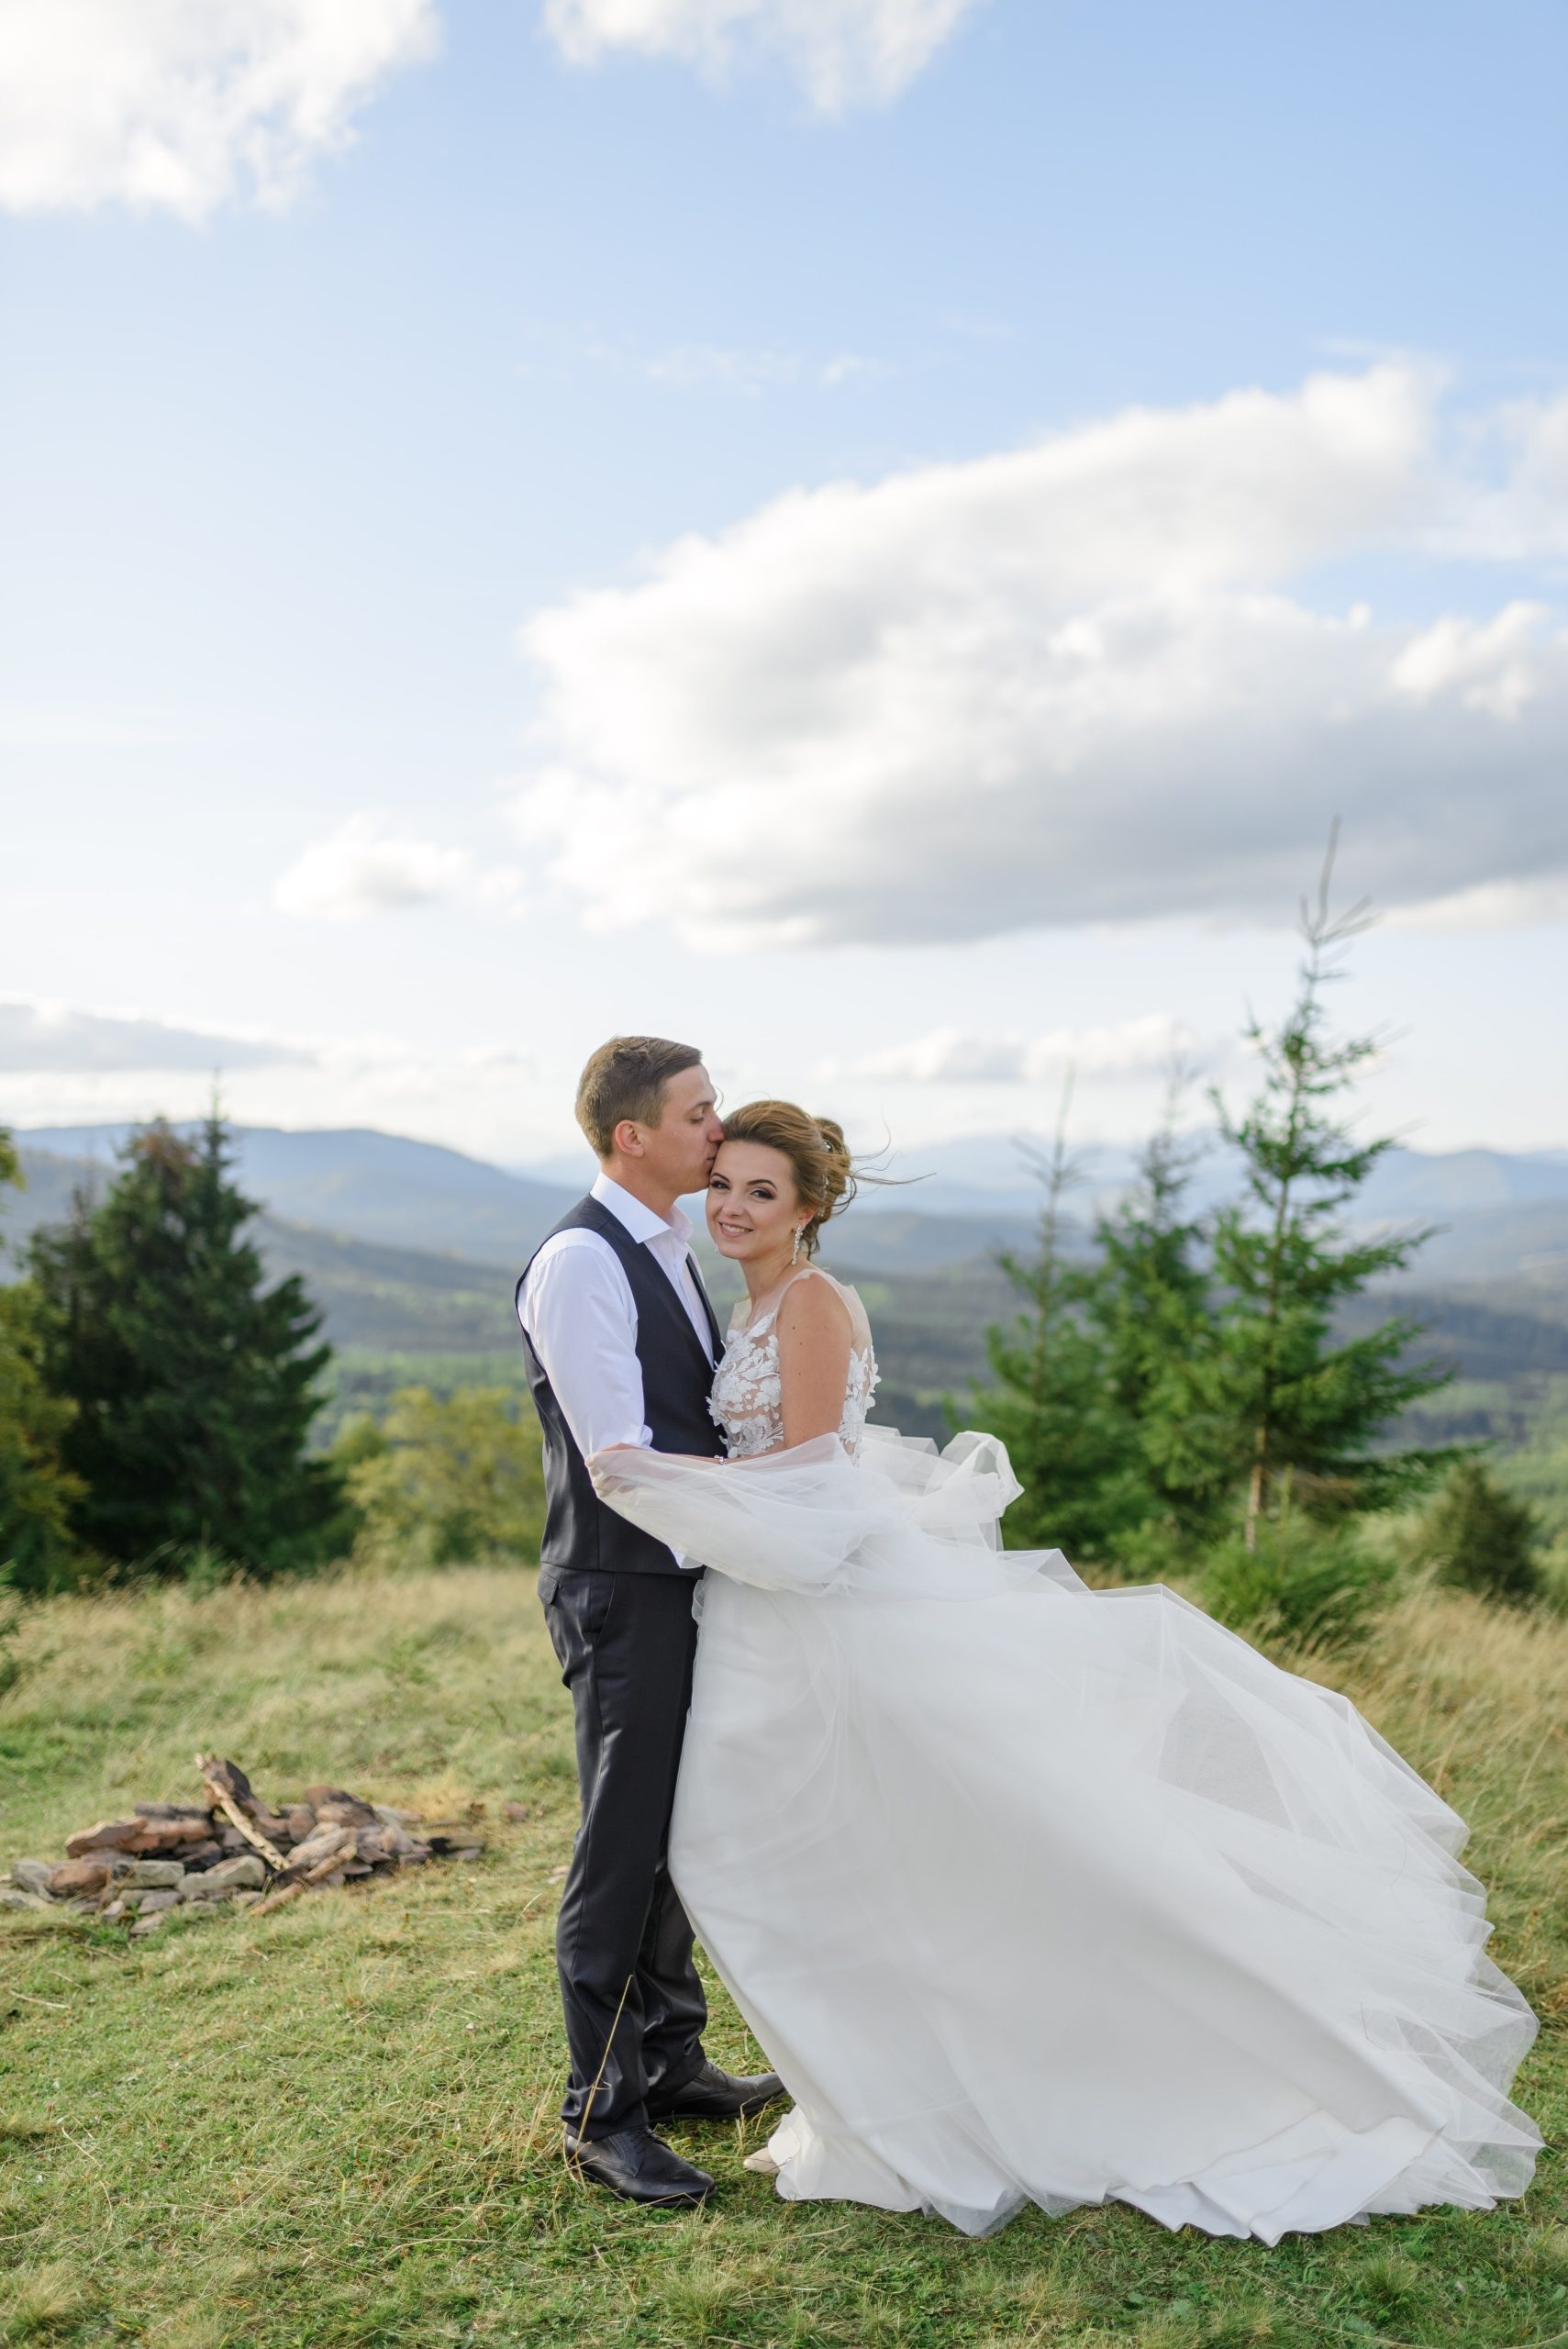 wedding photography in the mountains the bride an 2021 09 01 15 25 57 utc min scaled